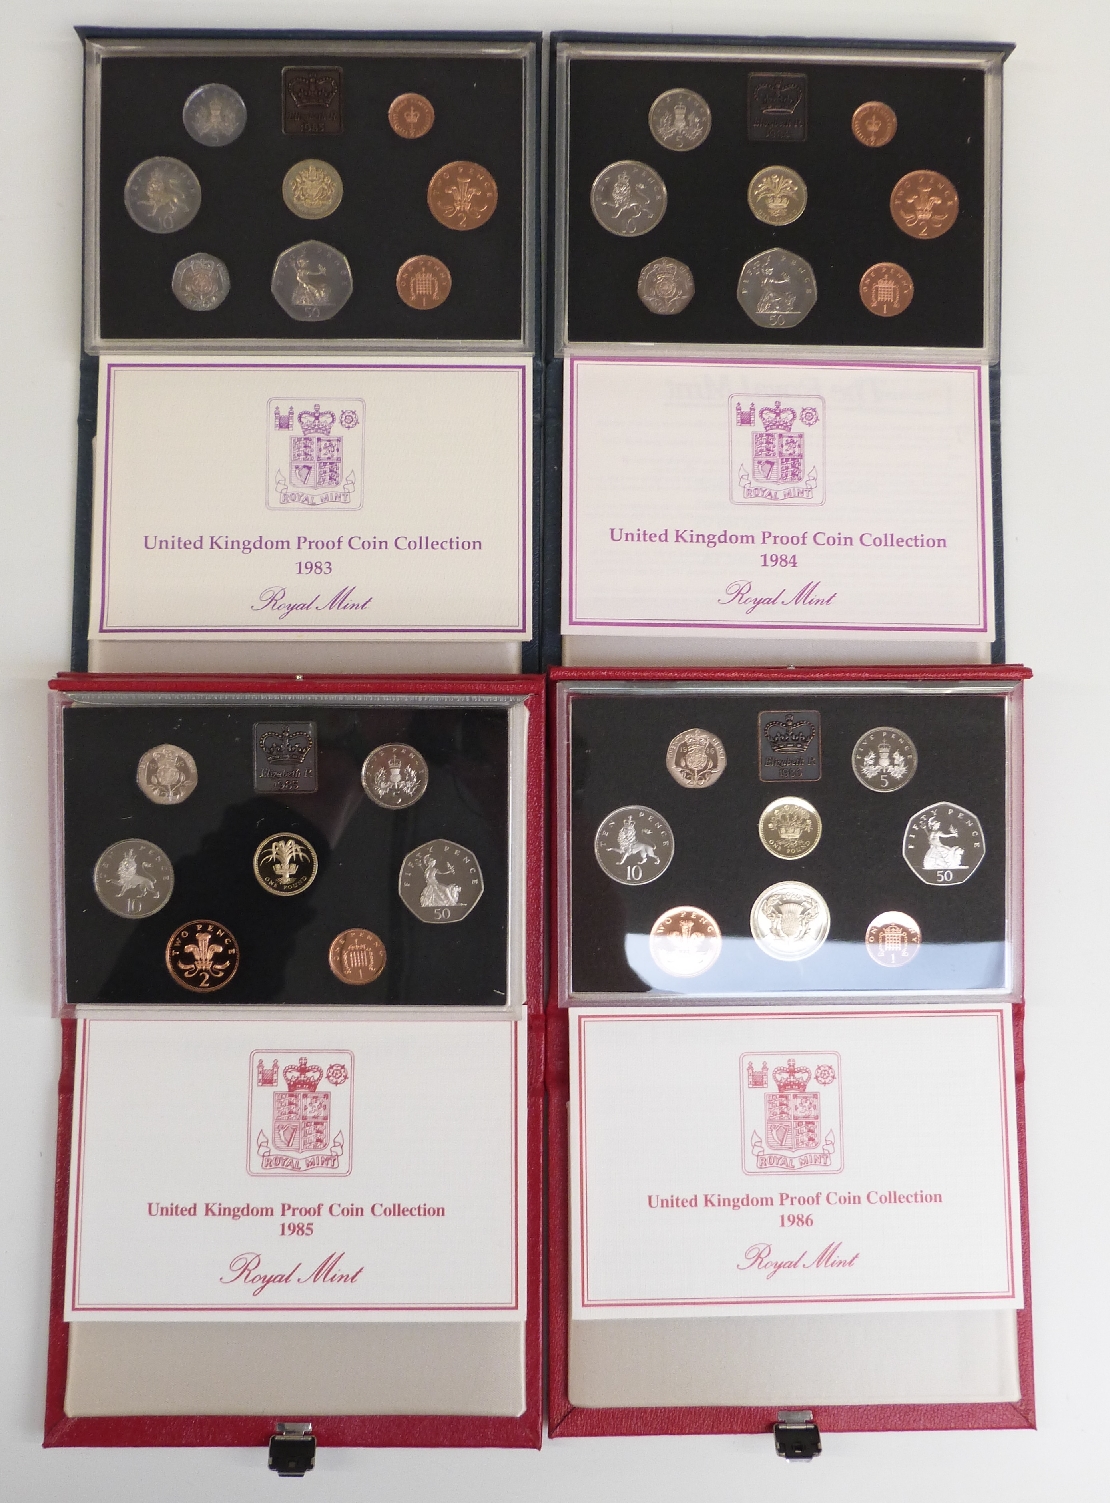 Four Royal Mint deluxe cased UK proof coin sets 1983, 1984, 1985 and 1986